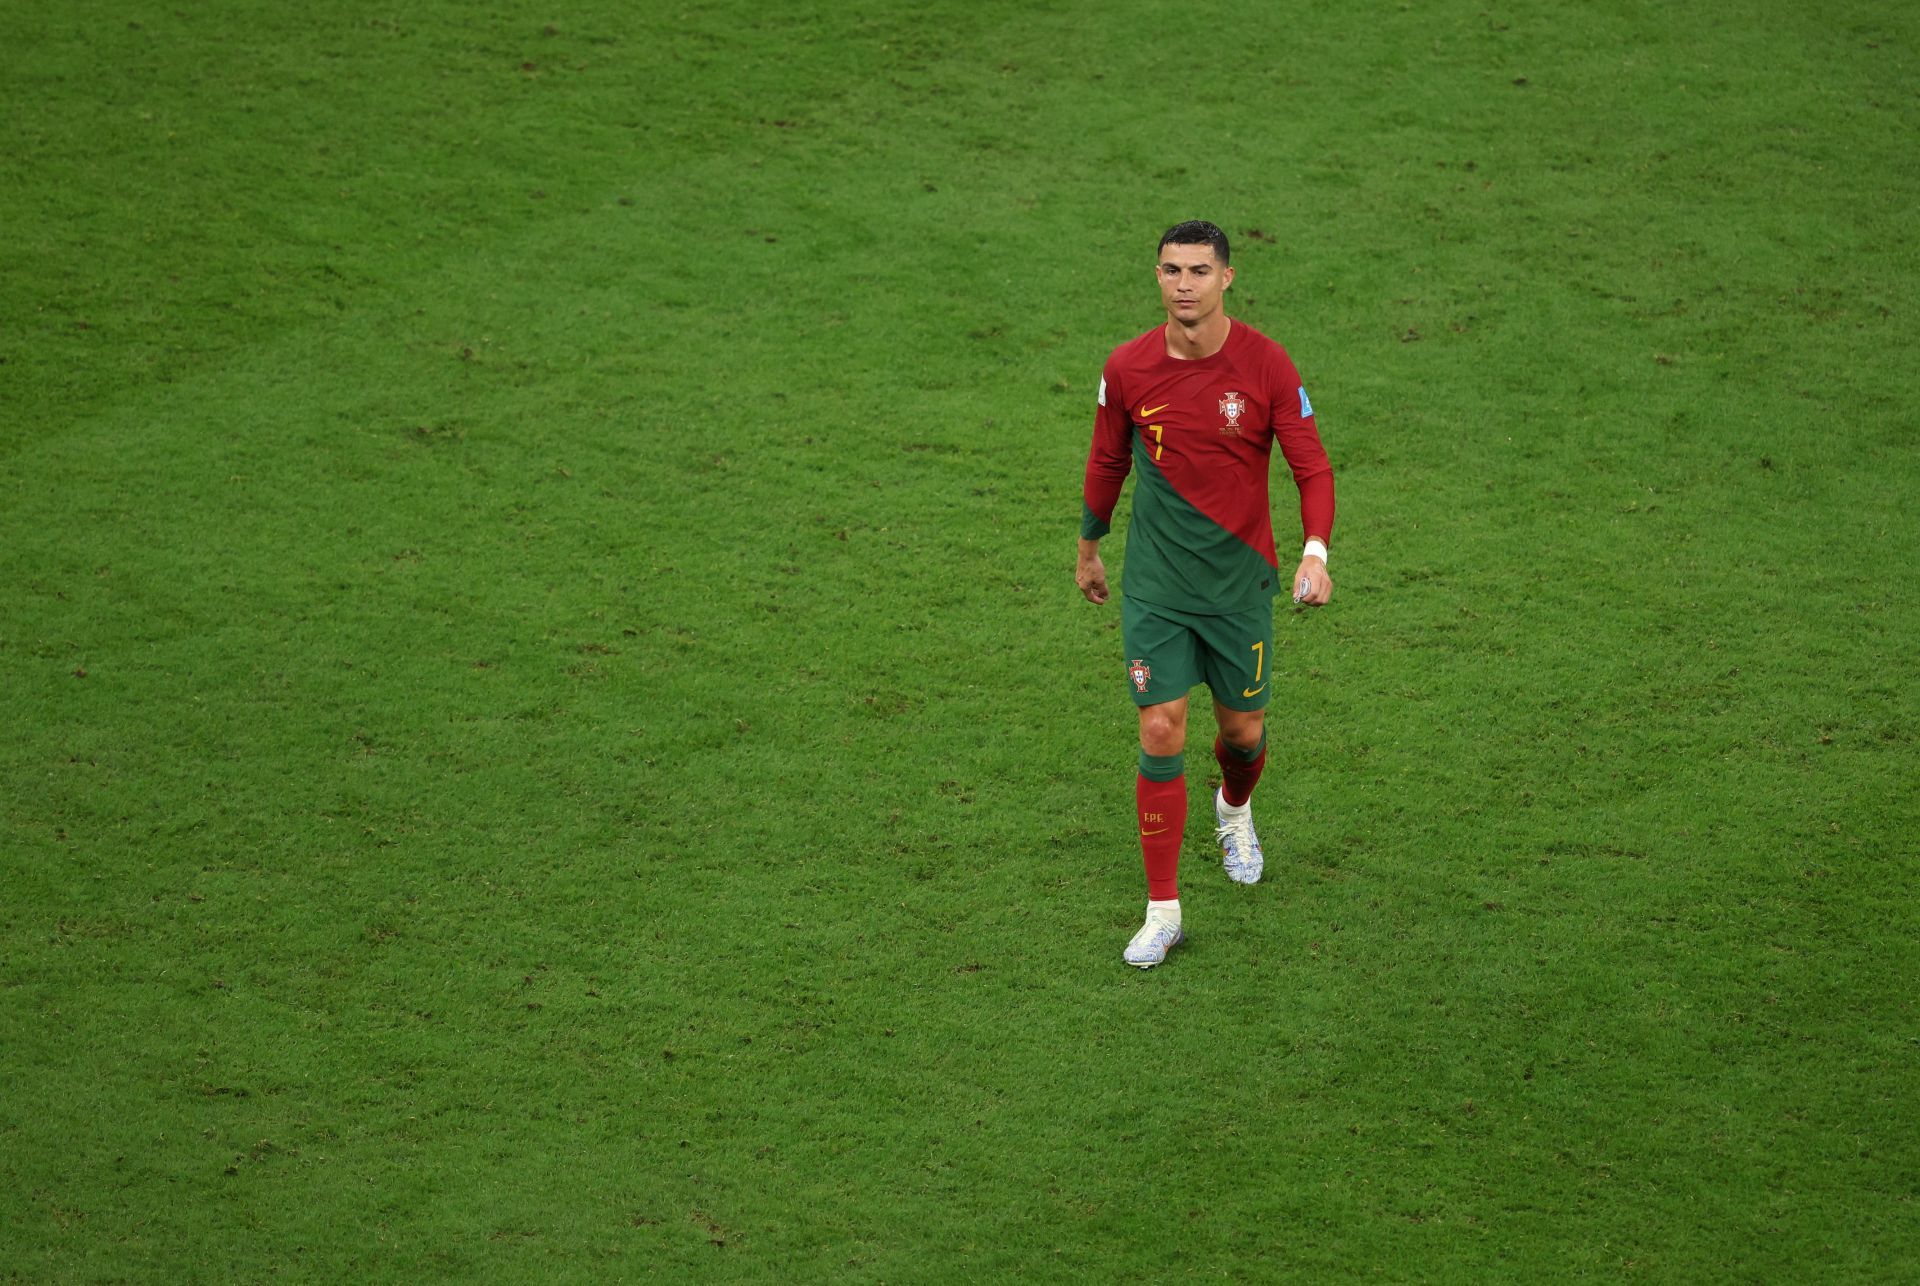 Cristiano Ronaldo shut down any rumours that he might leave the national team.